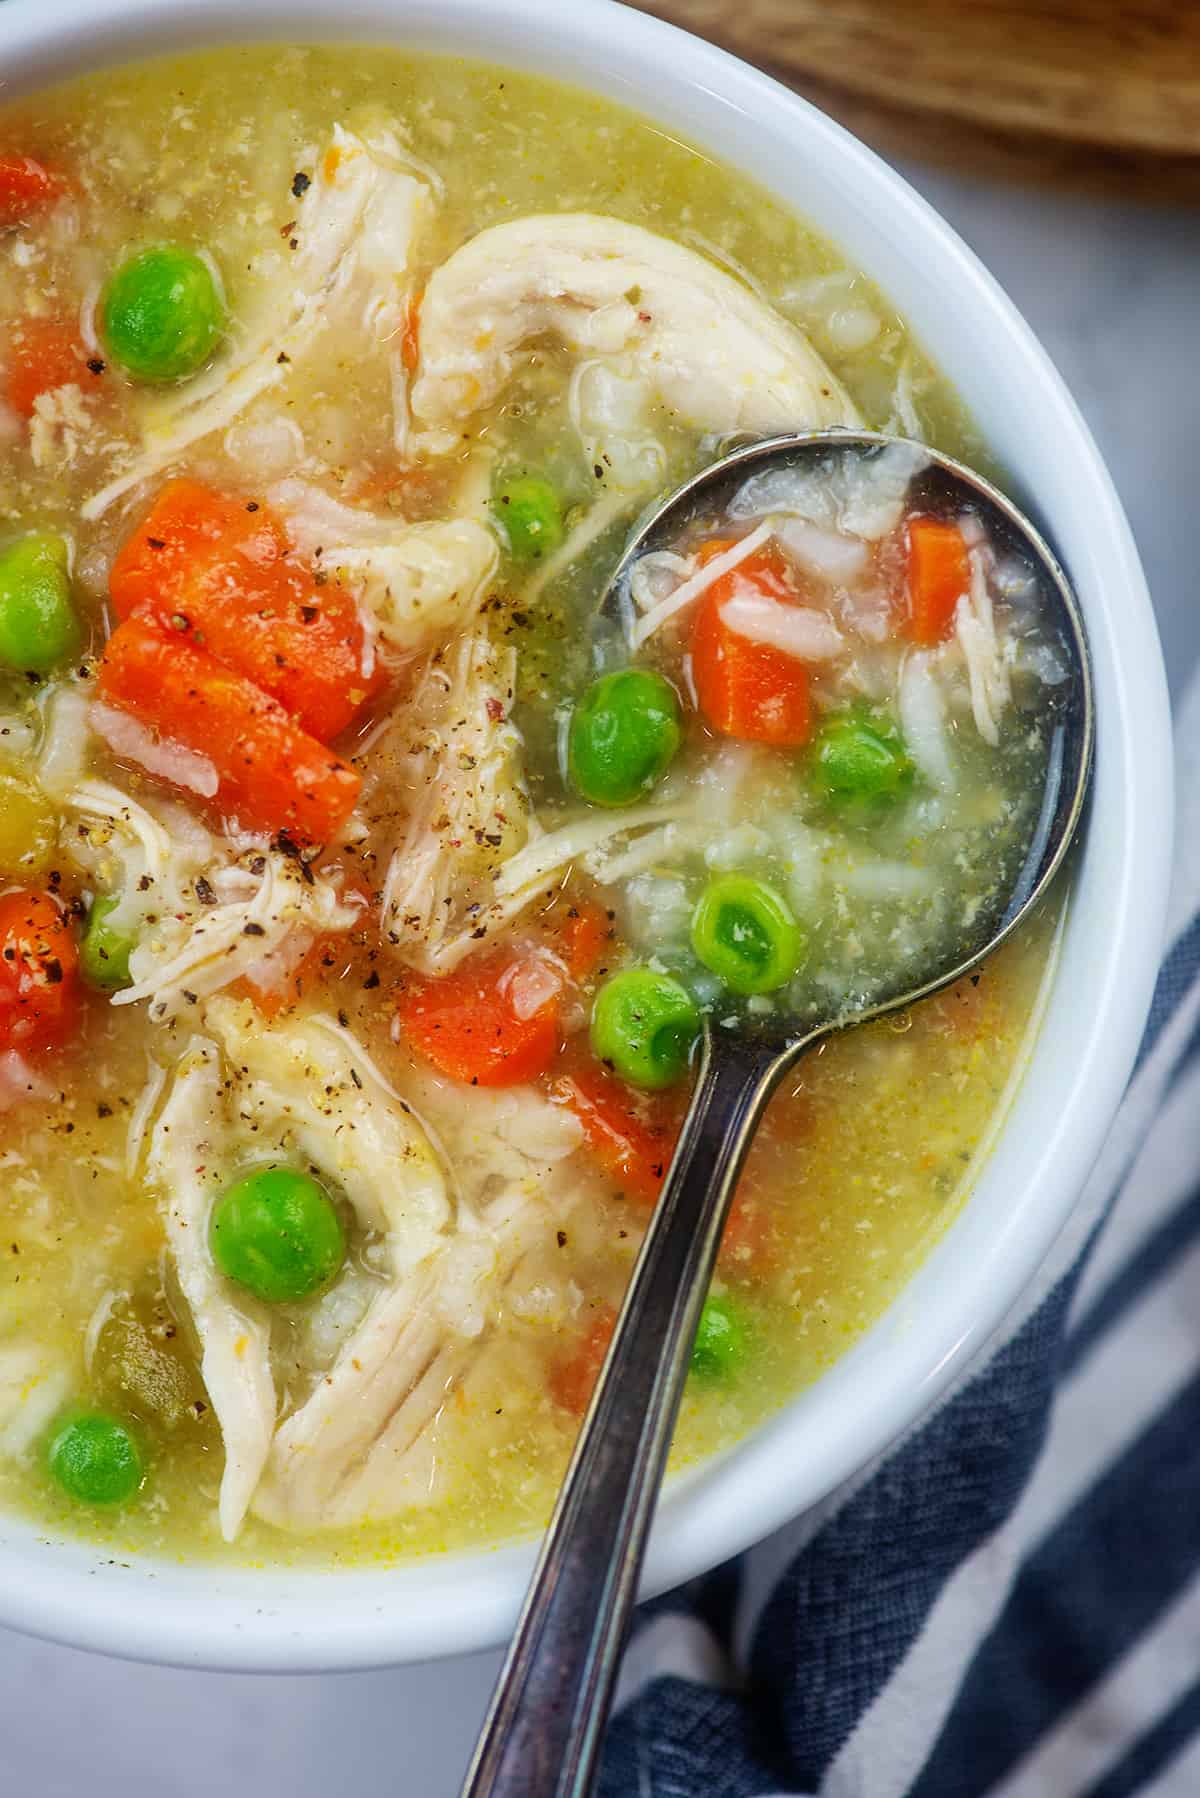 https://www.bunsinmyoven.com/wp-content/uploads/2021/02/slow-cooker-chicken-and-rice-soup.jpg